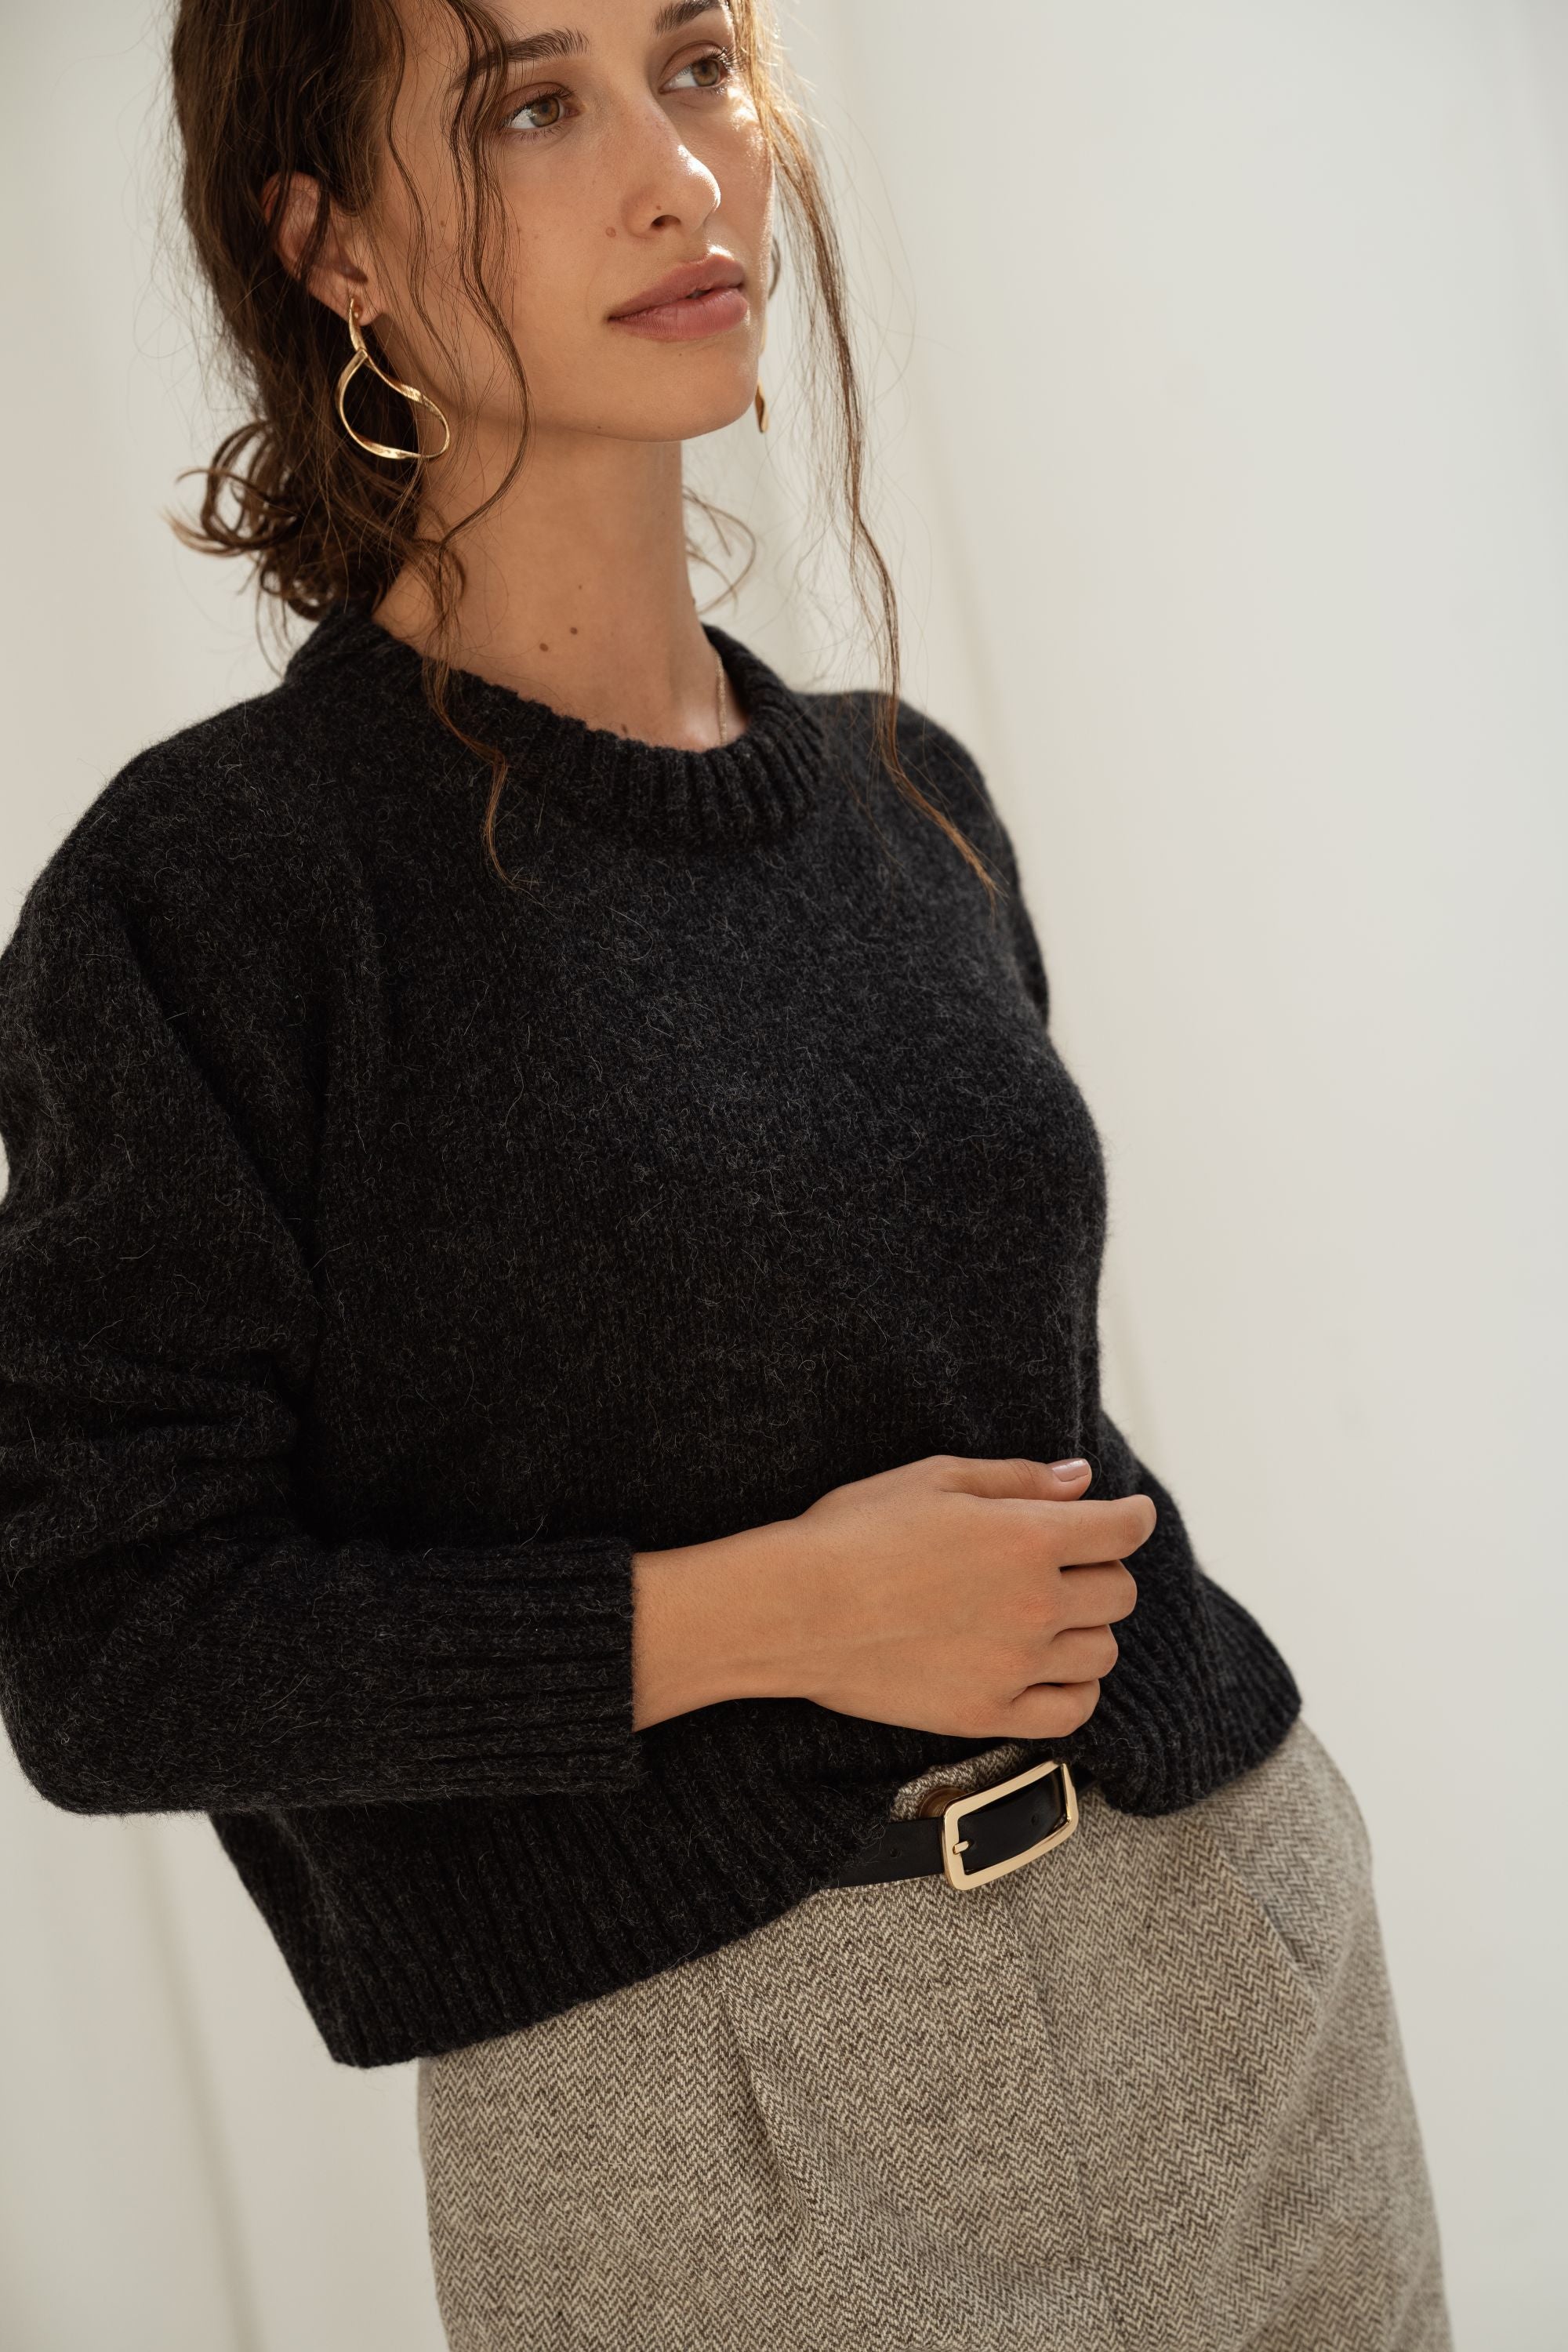 Women's crewneck jumper in recycled wool and alpaca blend in black.